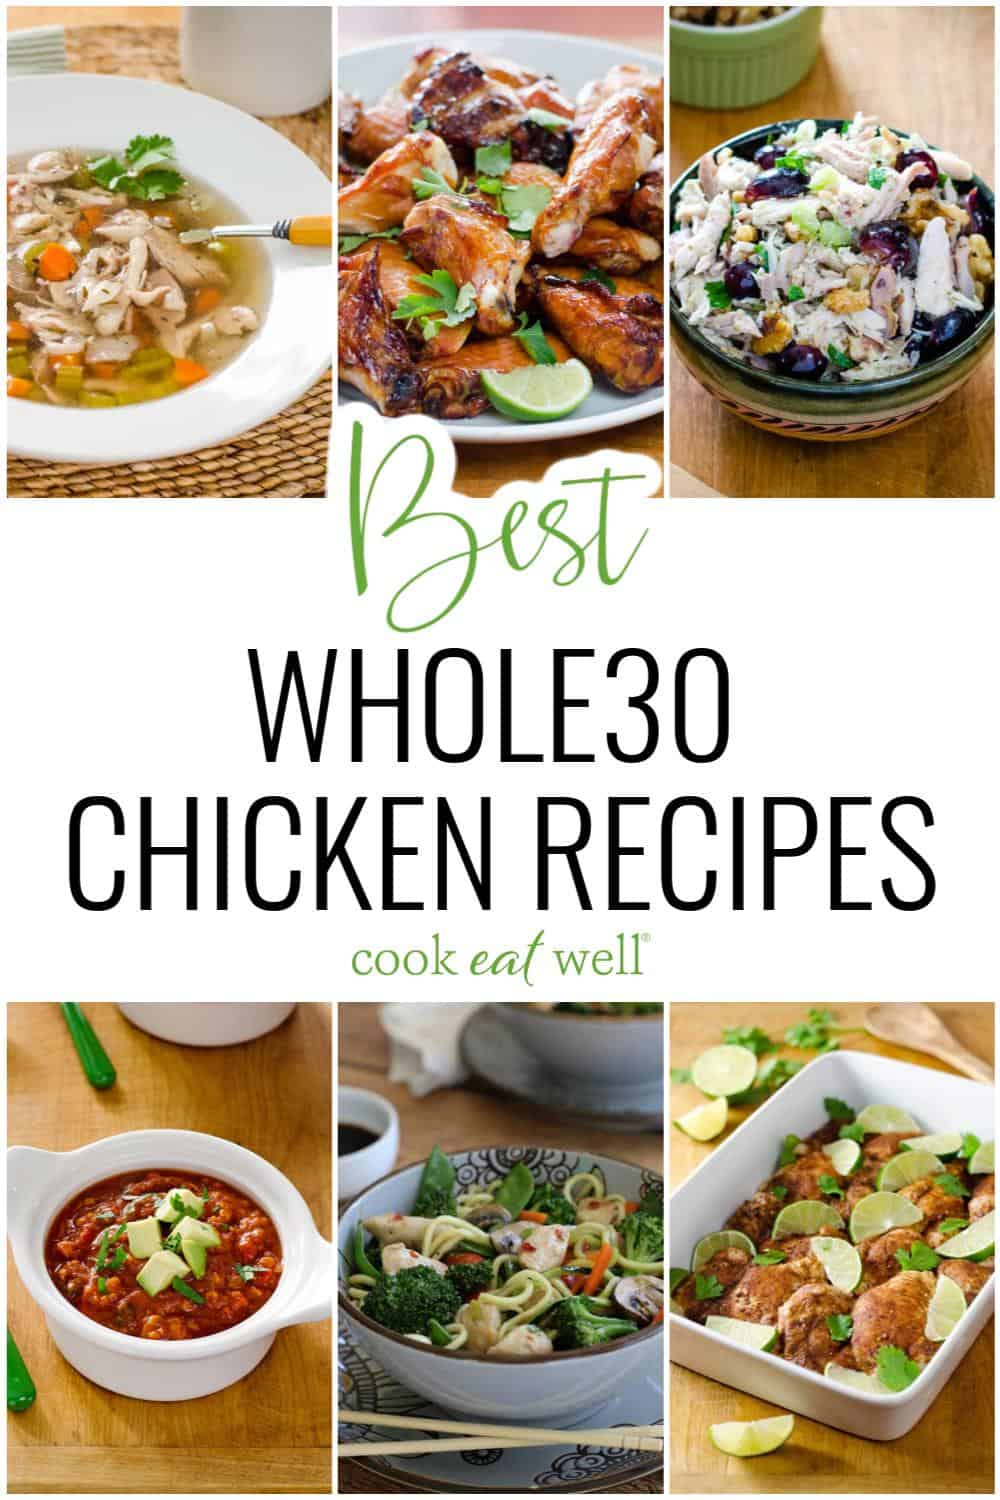 20 Whole30 Chicken Recipes: Easy, Delicious, And Healthy - Cook Eat Well